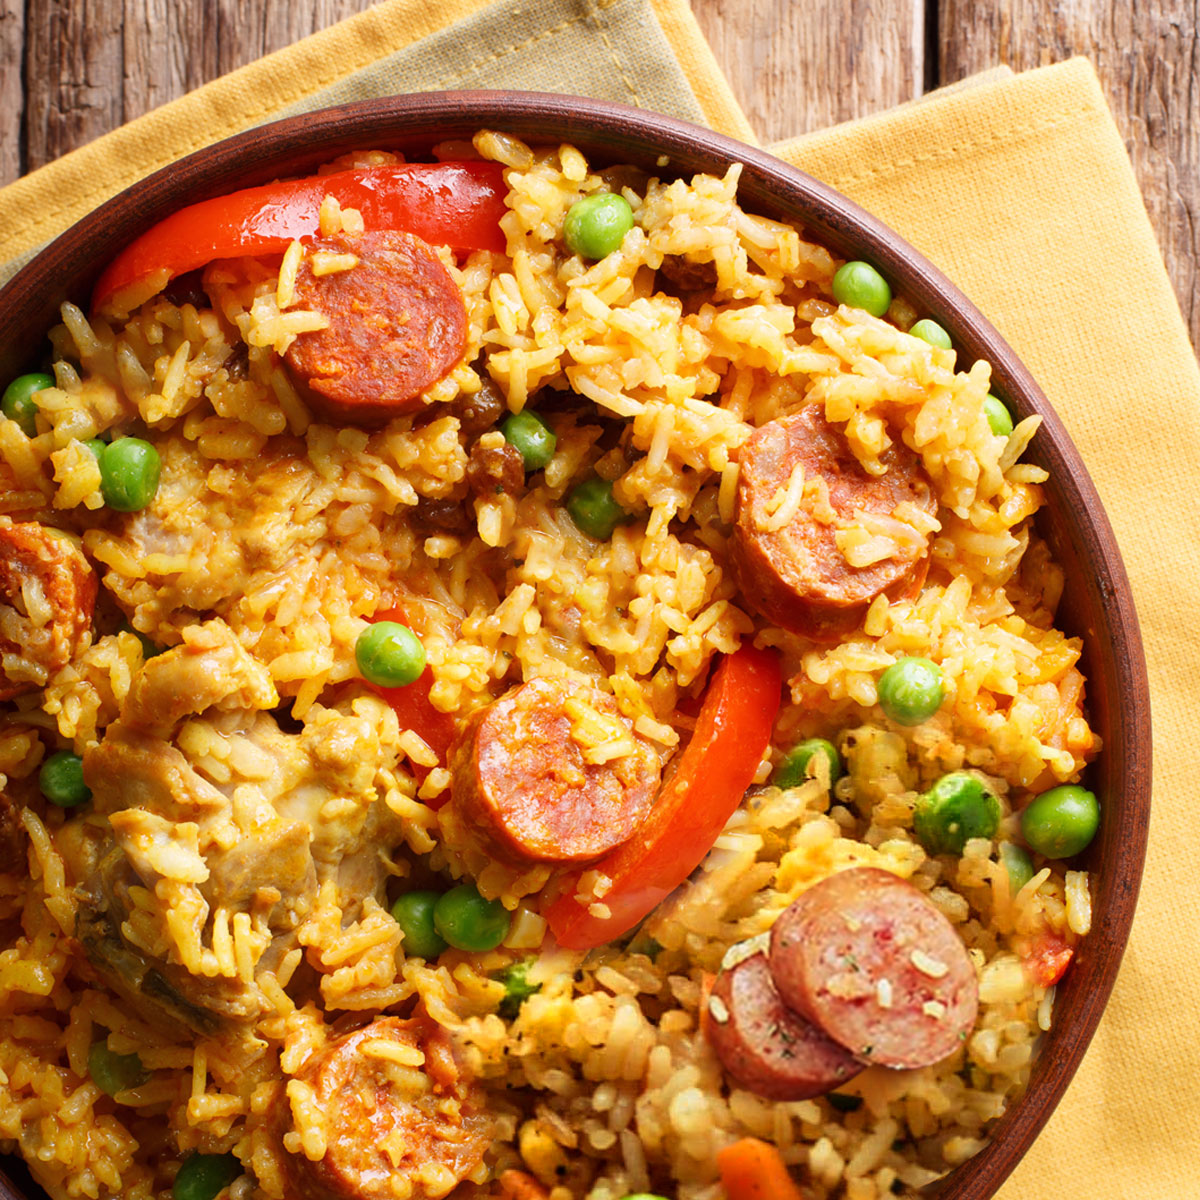 Kielbasa and rice, fried with eggs and peppers